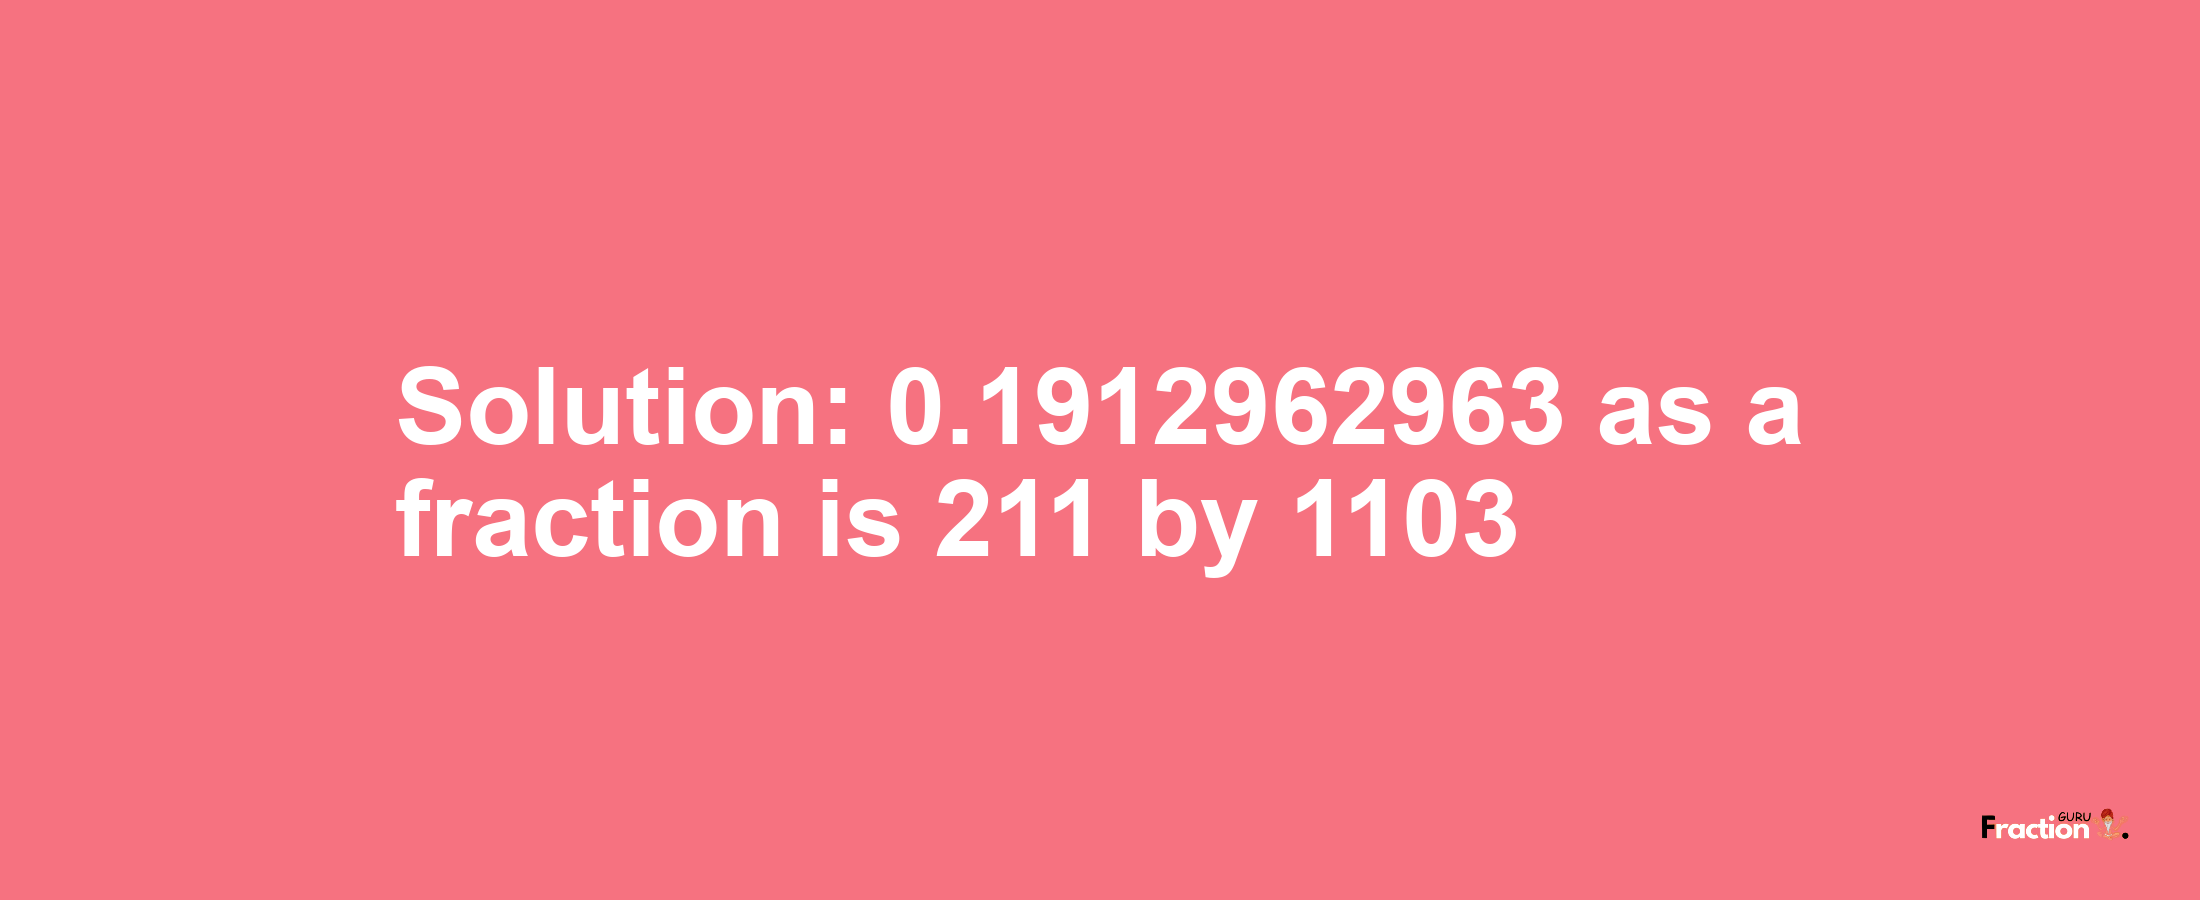 Solution:0.1912962963 as a fraction is 211/1103